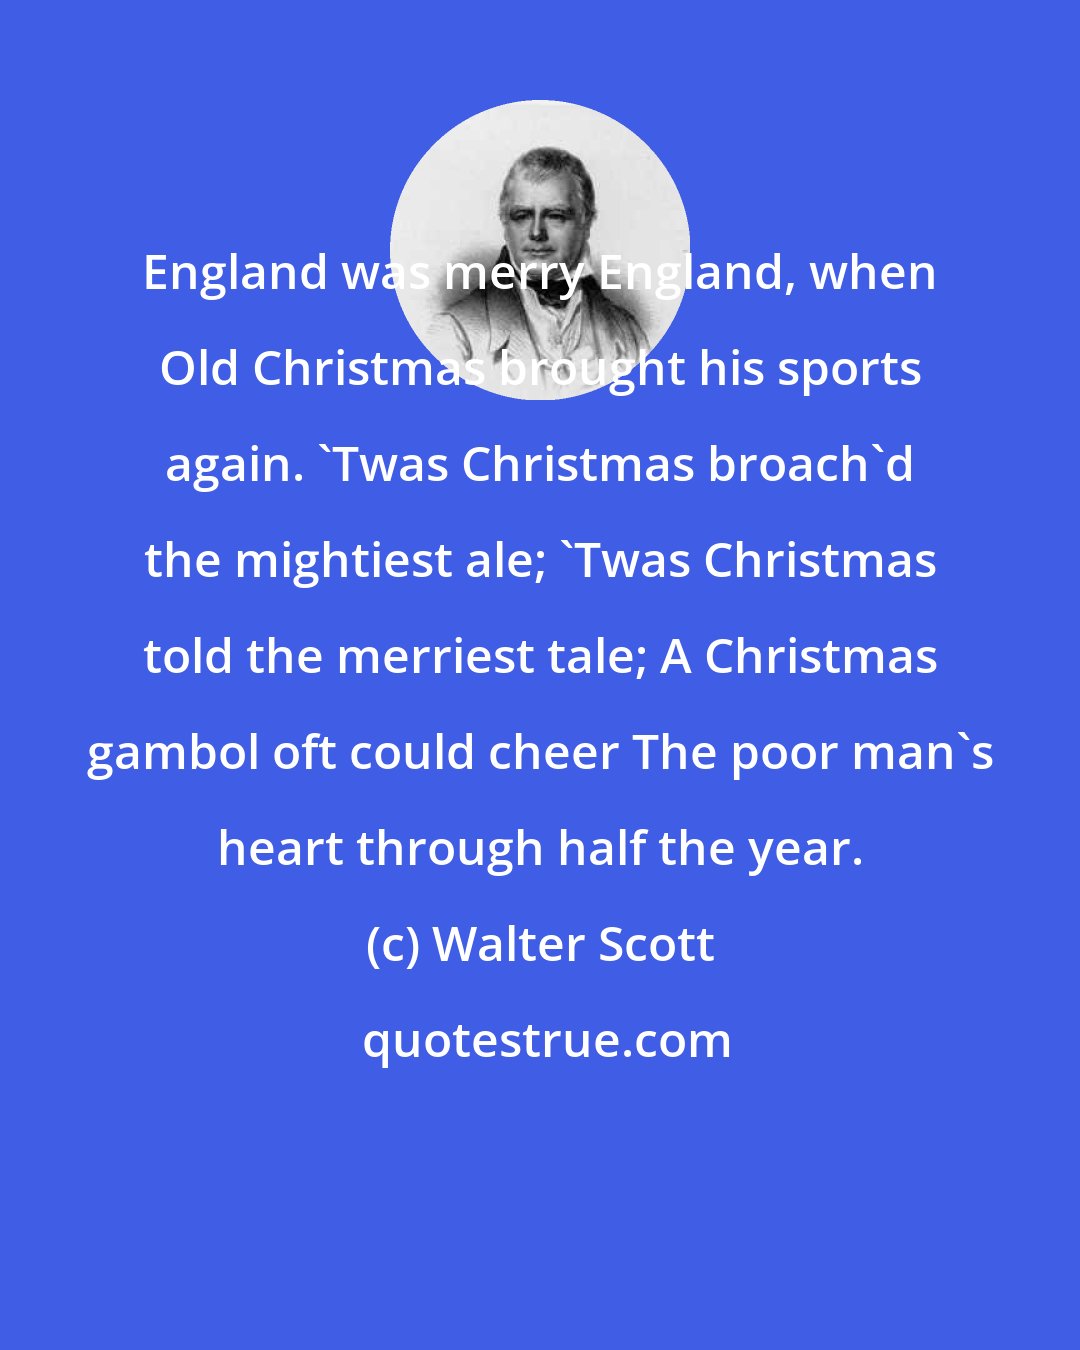 Walter Scott: England was merry England, when Old Christmas brought his sports again. 'Twas Christmas broach'd the mightiest ale; 'Twas Christmas told the merriest tale; A Christmas gambol oft could cheer The poor man's heart through half the year.